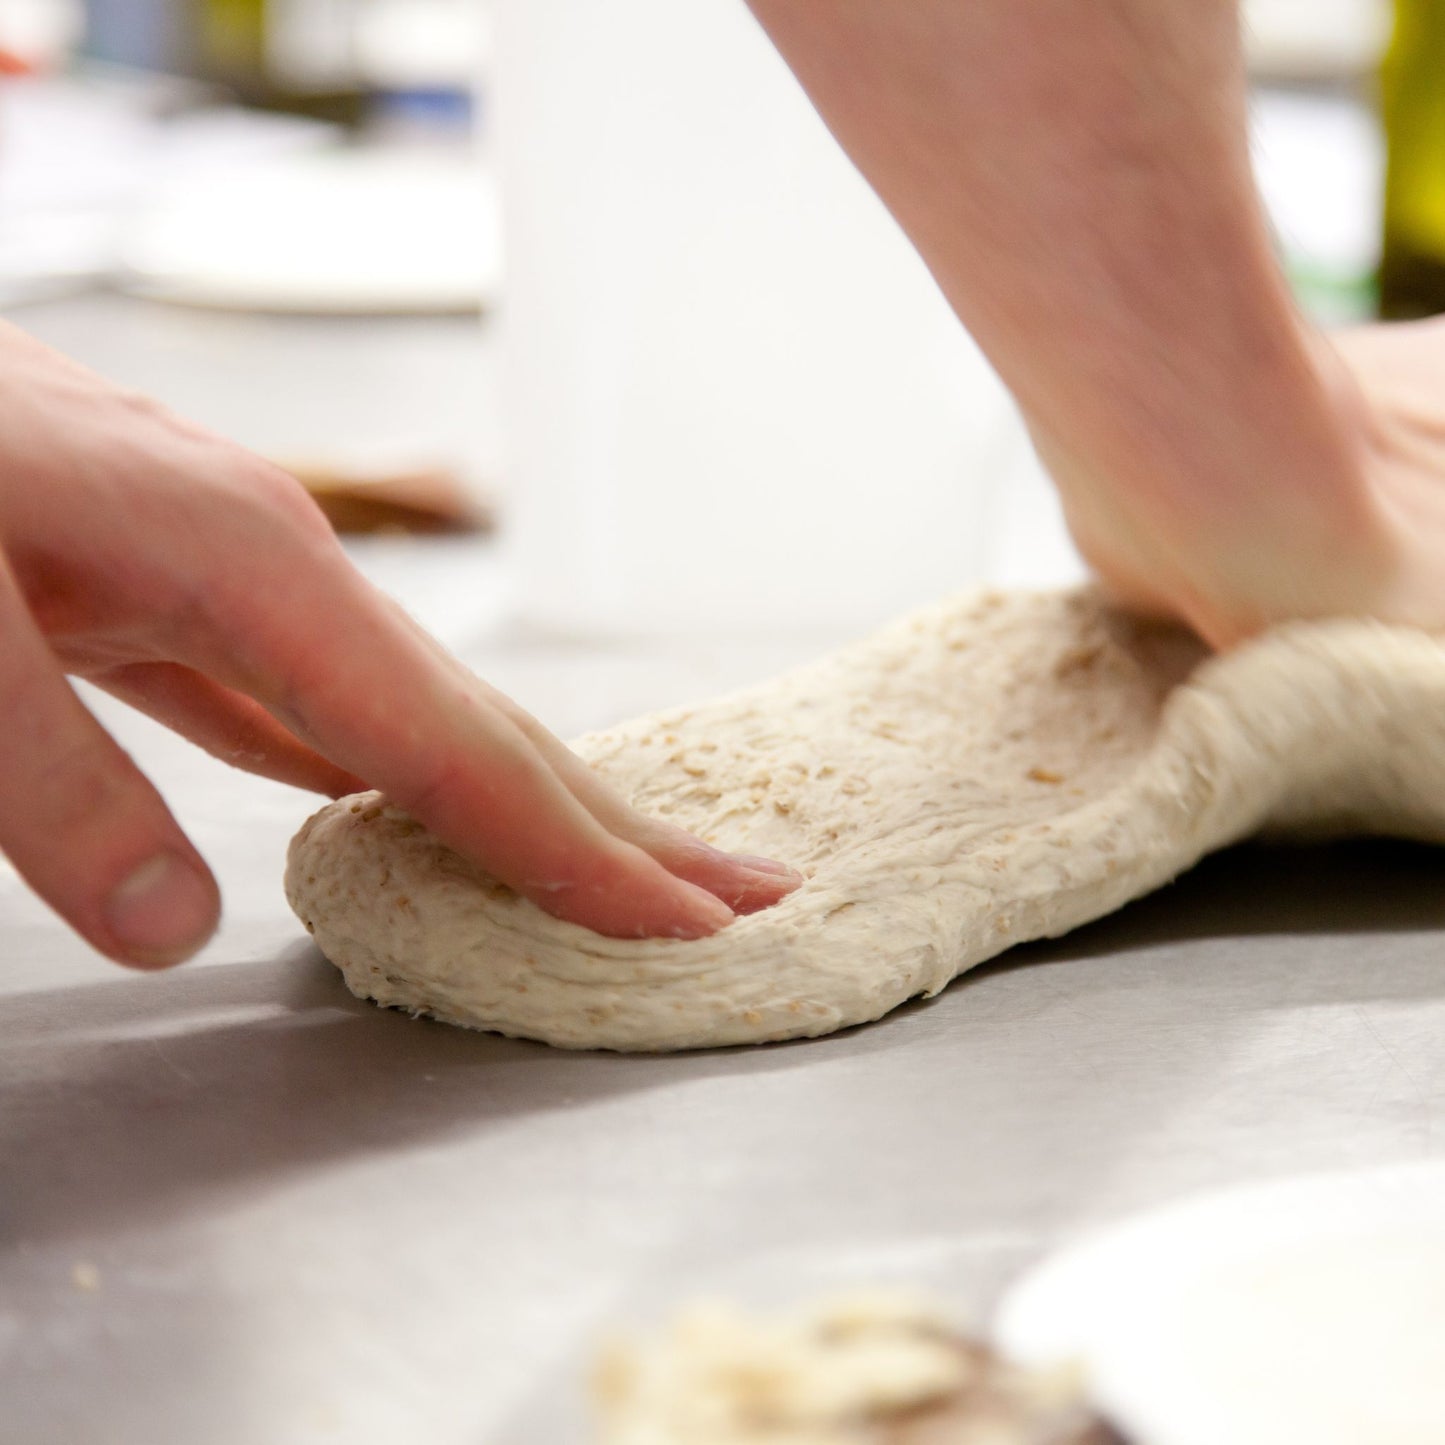 Hands stretching bread dough